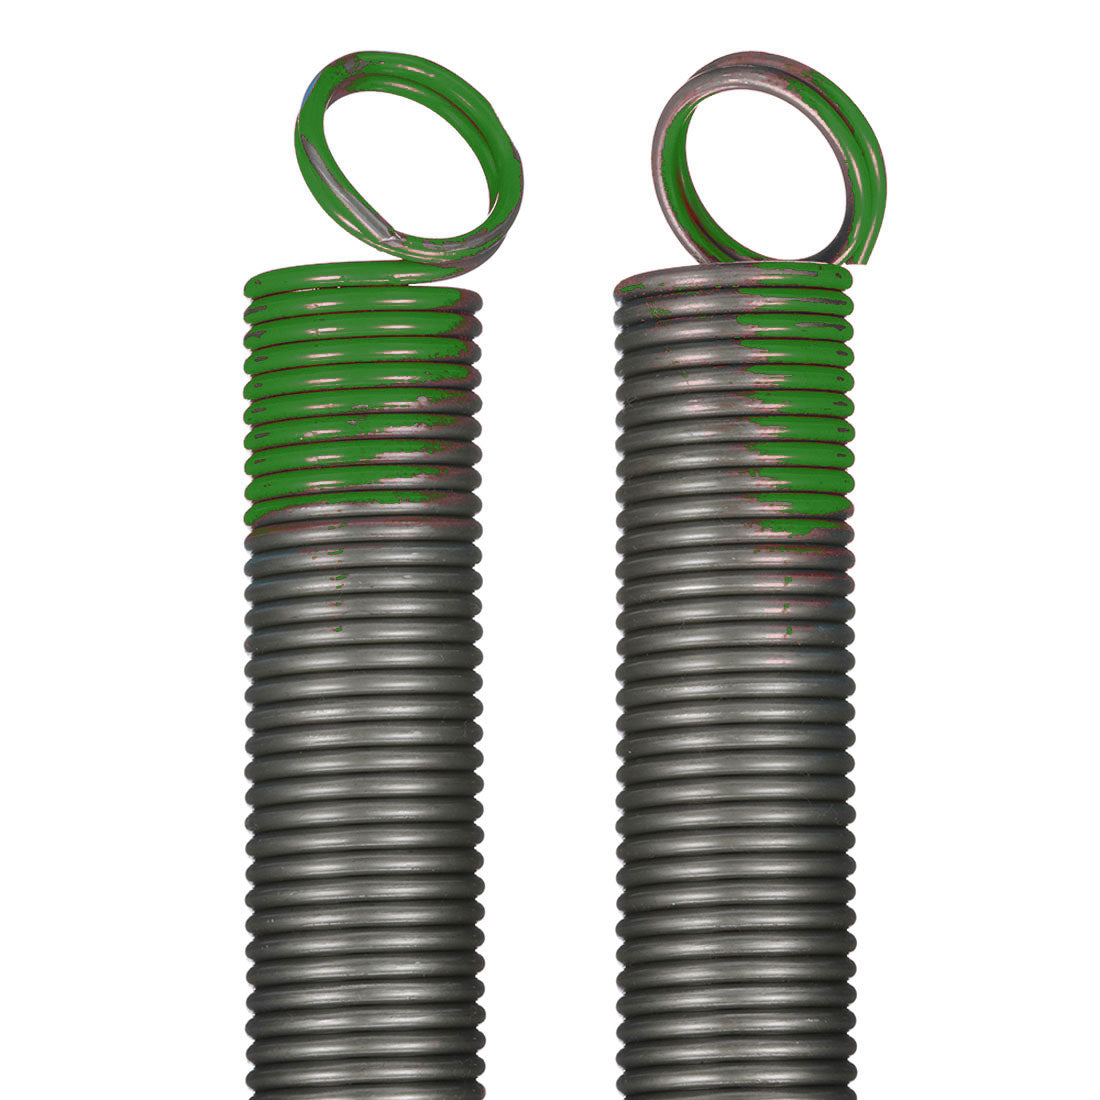 DURA-LIFT 120 lb Heavy-Duty Doubled-Looped Garage Door Extension Spring (2-Pack)